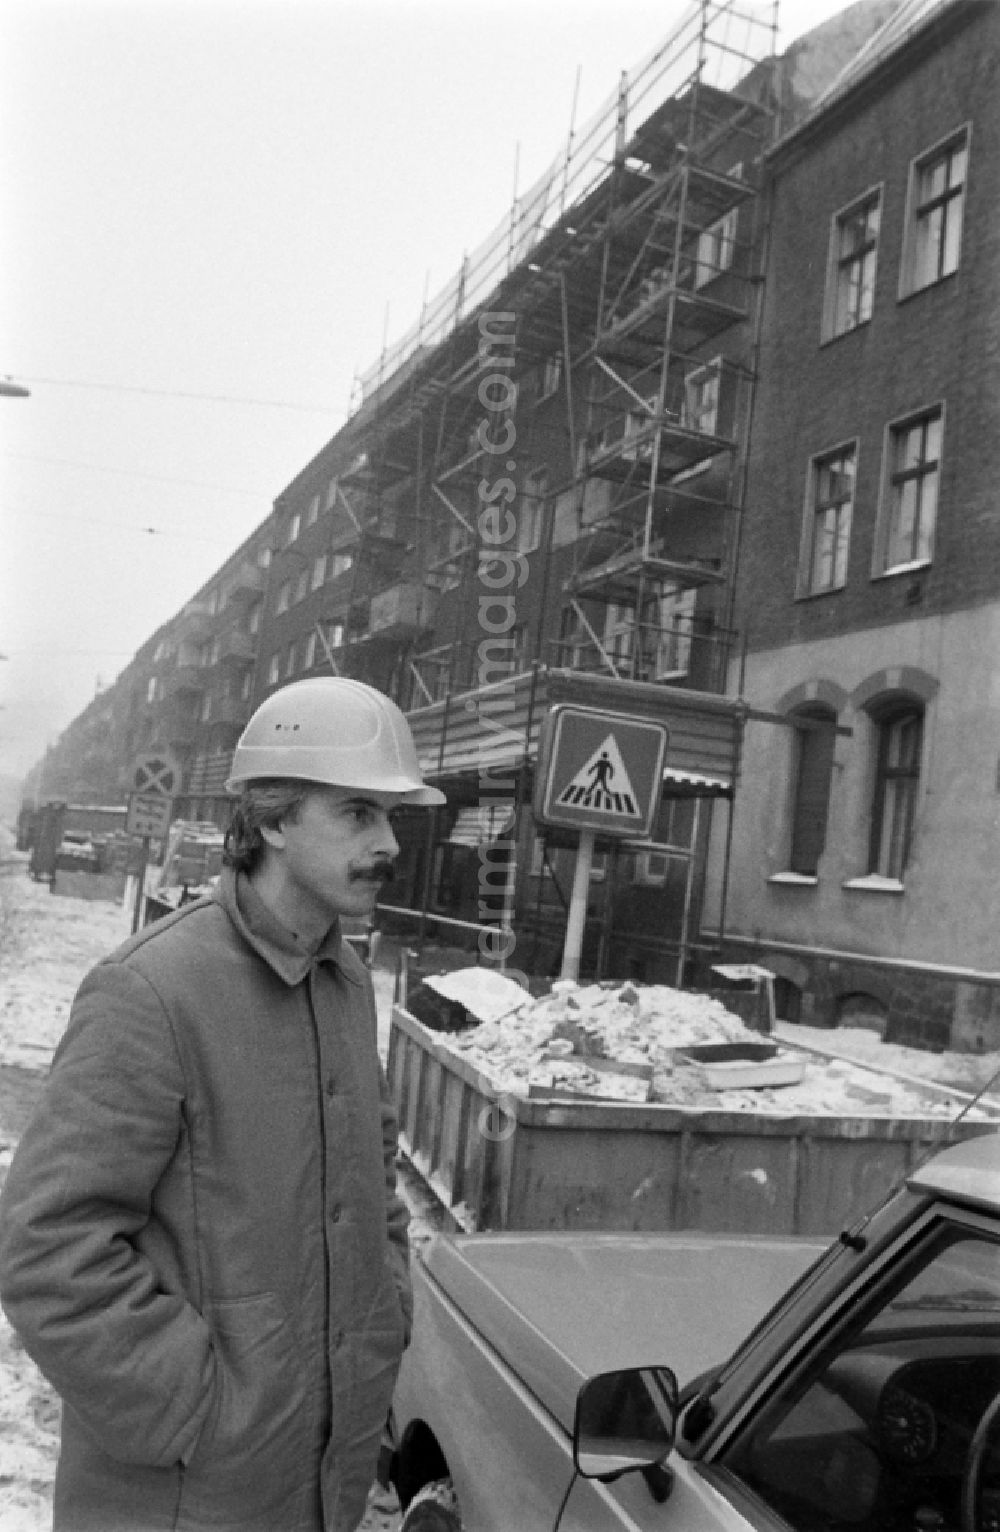 GDR image archive: Berlin - Construction worker with construction helmet stands on street Edisonstrasse in front of apartment building / residential building with scaffolding in the district of Treptow-Koepenick in Berlin, the former capital of the GDR, German Democratic Republic